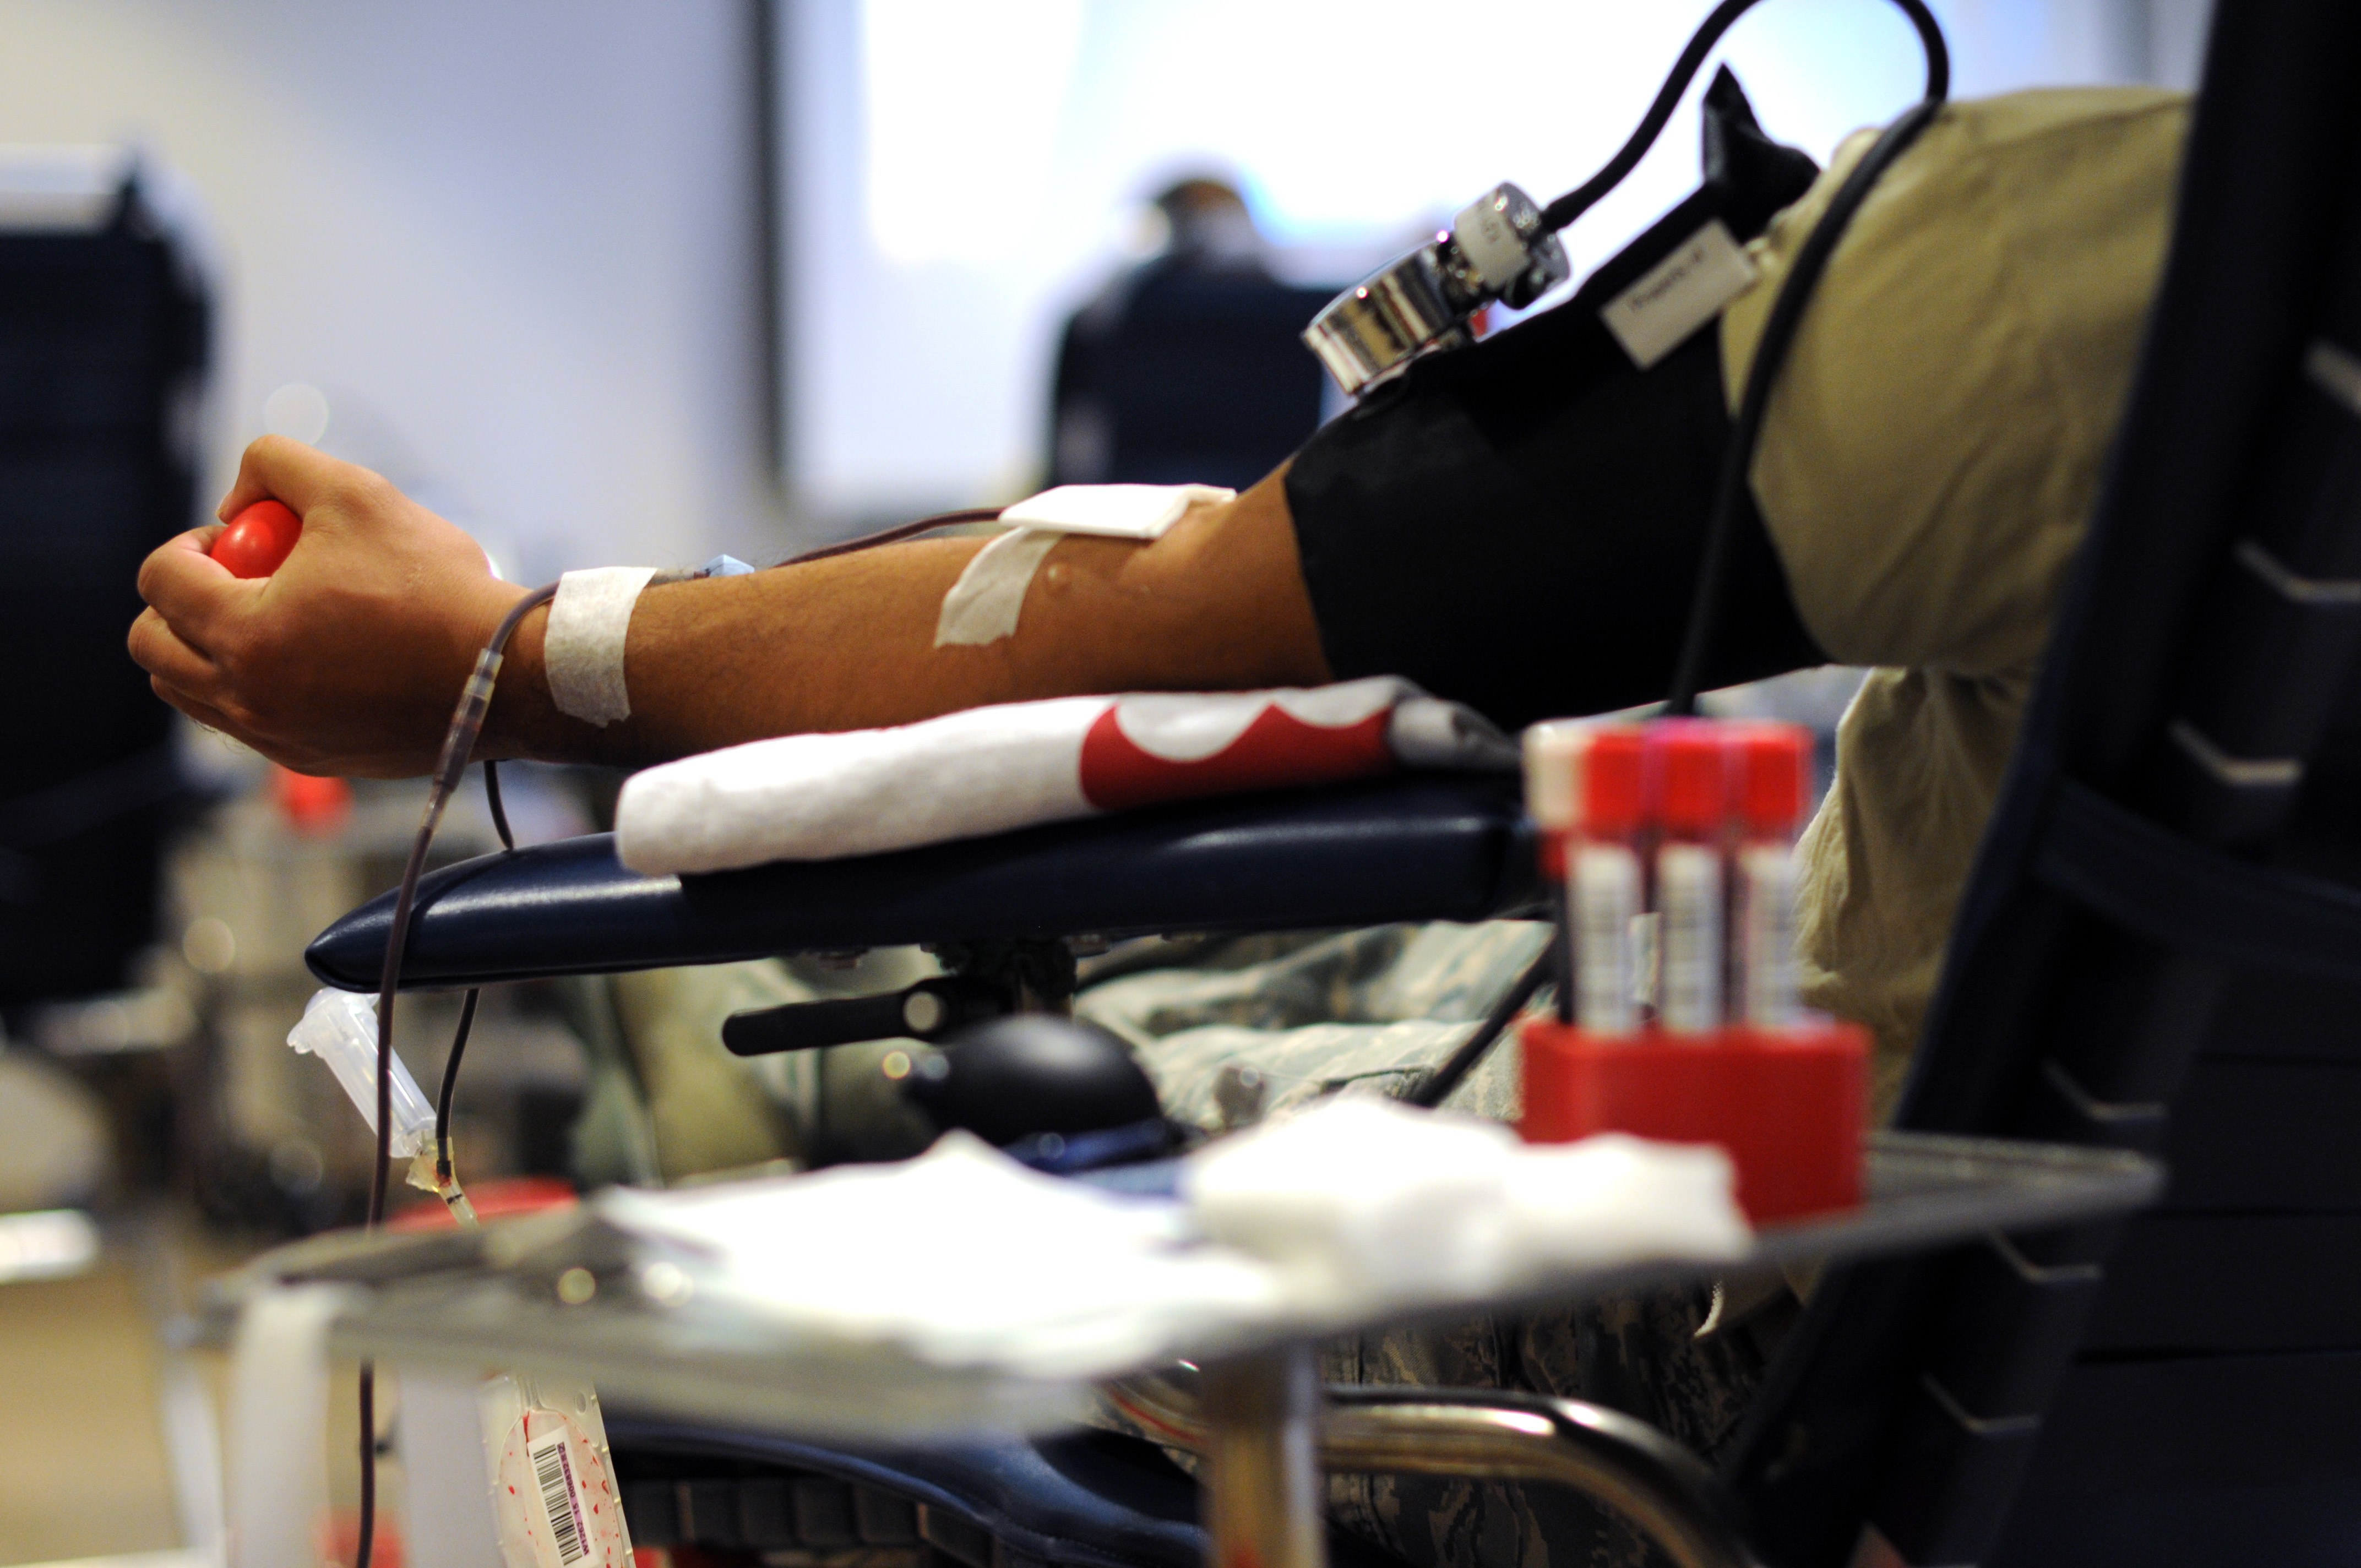 A U.S. Air Force Airman from the New Jersey Air National Guard's 177th Fighter Wing squeezes an object while giving blood during a blood drive on Atlantic City Air National Guard Base, N.J., Aug. 29, 2015. The objects are given out for donors to squeeze in order to help blood flow. (U.S. Air National Guard photo by Senior Airman Shane S. Karp/Released)